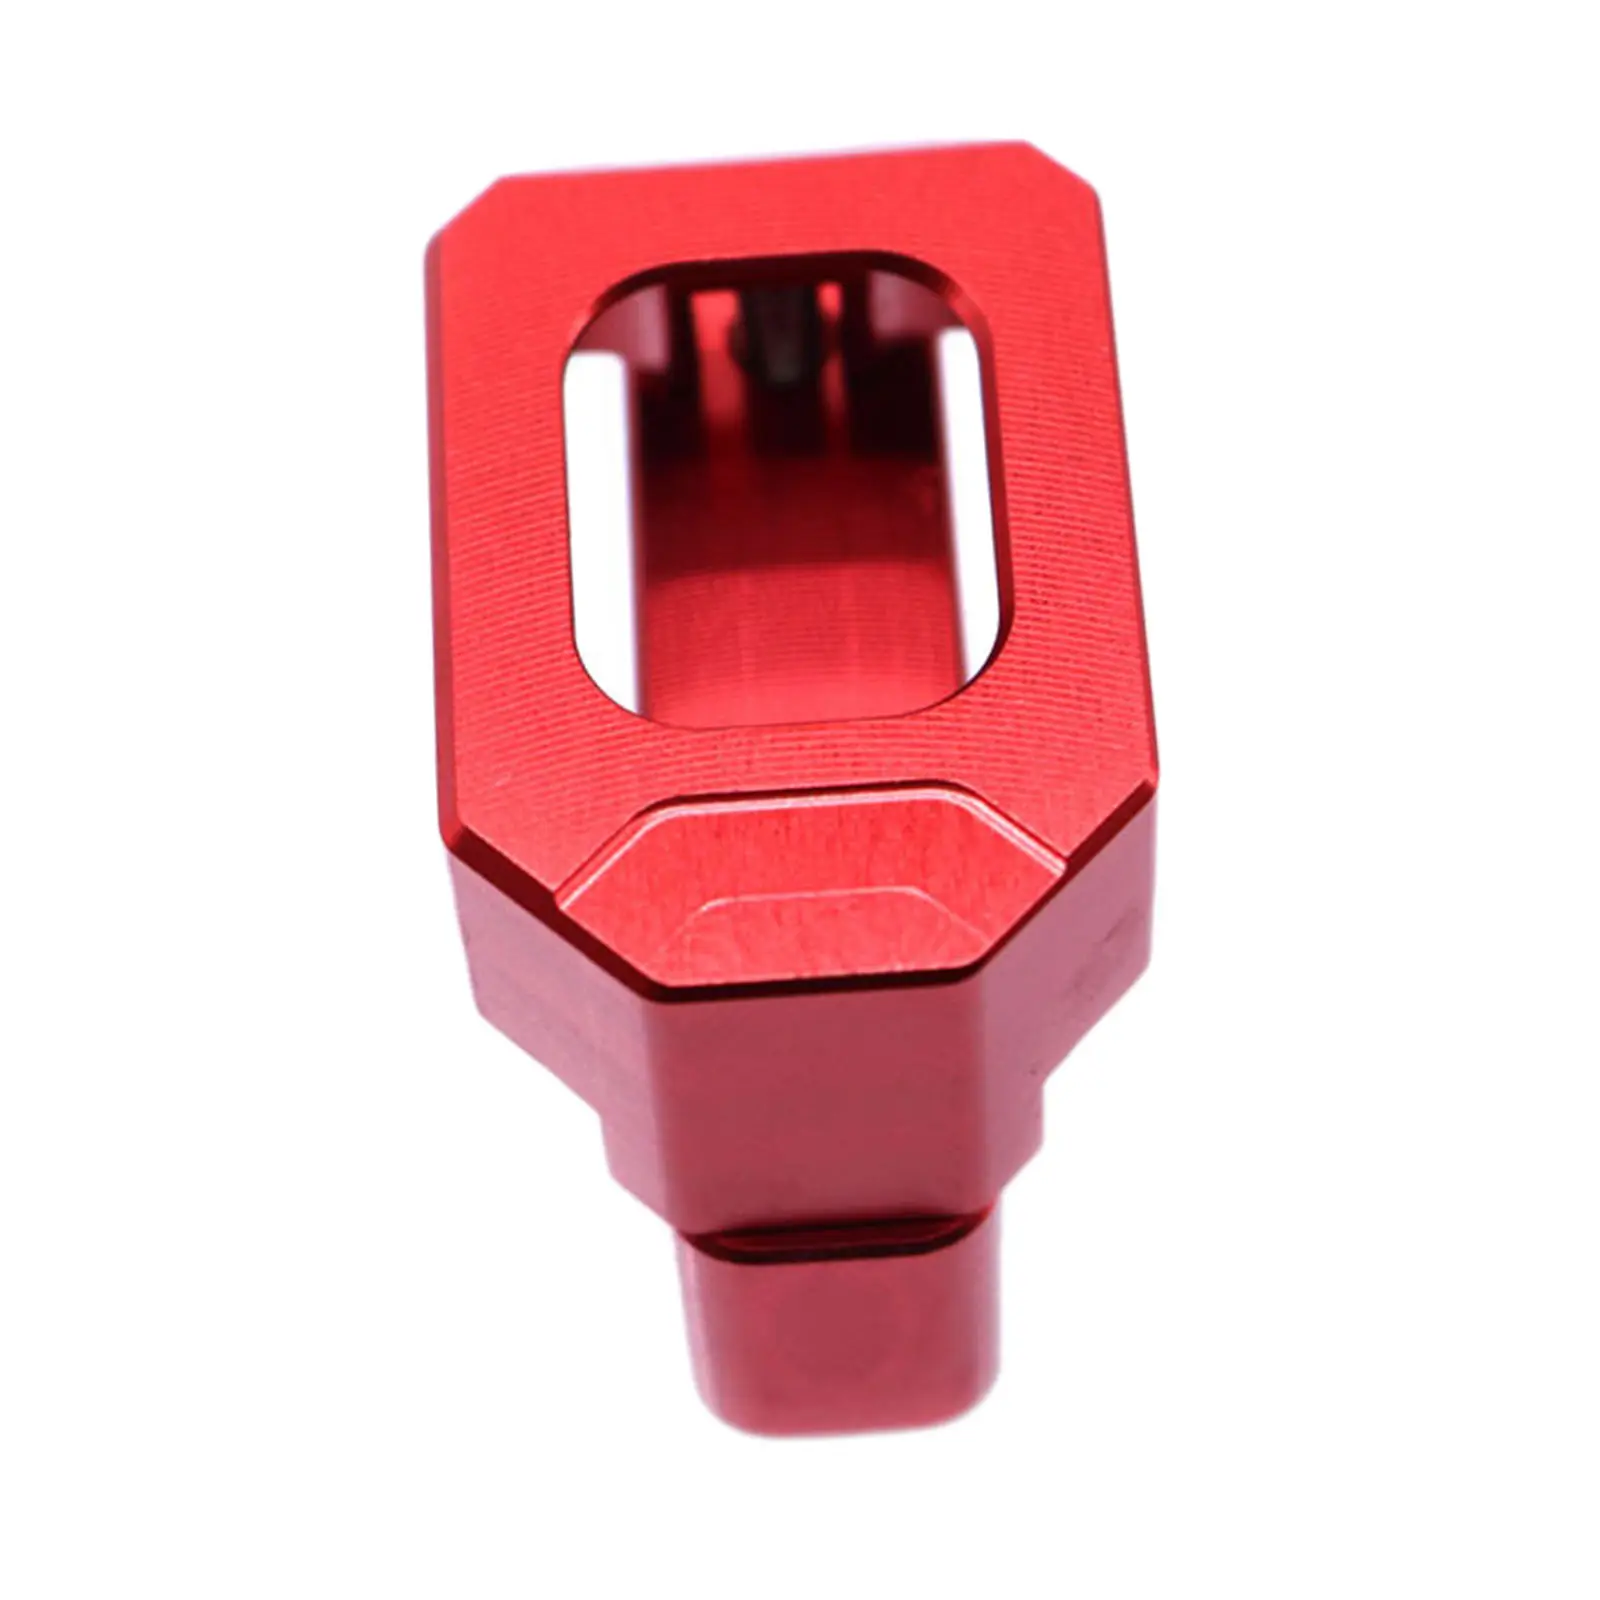 Speed Gear Indicator Holder Aluminum Alloy Accessories Universal Bracket Stand for Honda for Kawasaki for Yamaha for Ducati